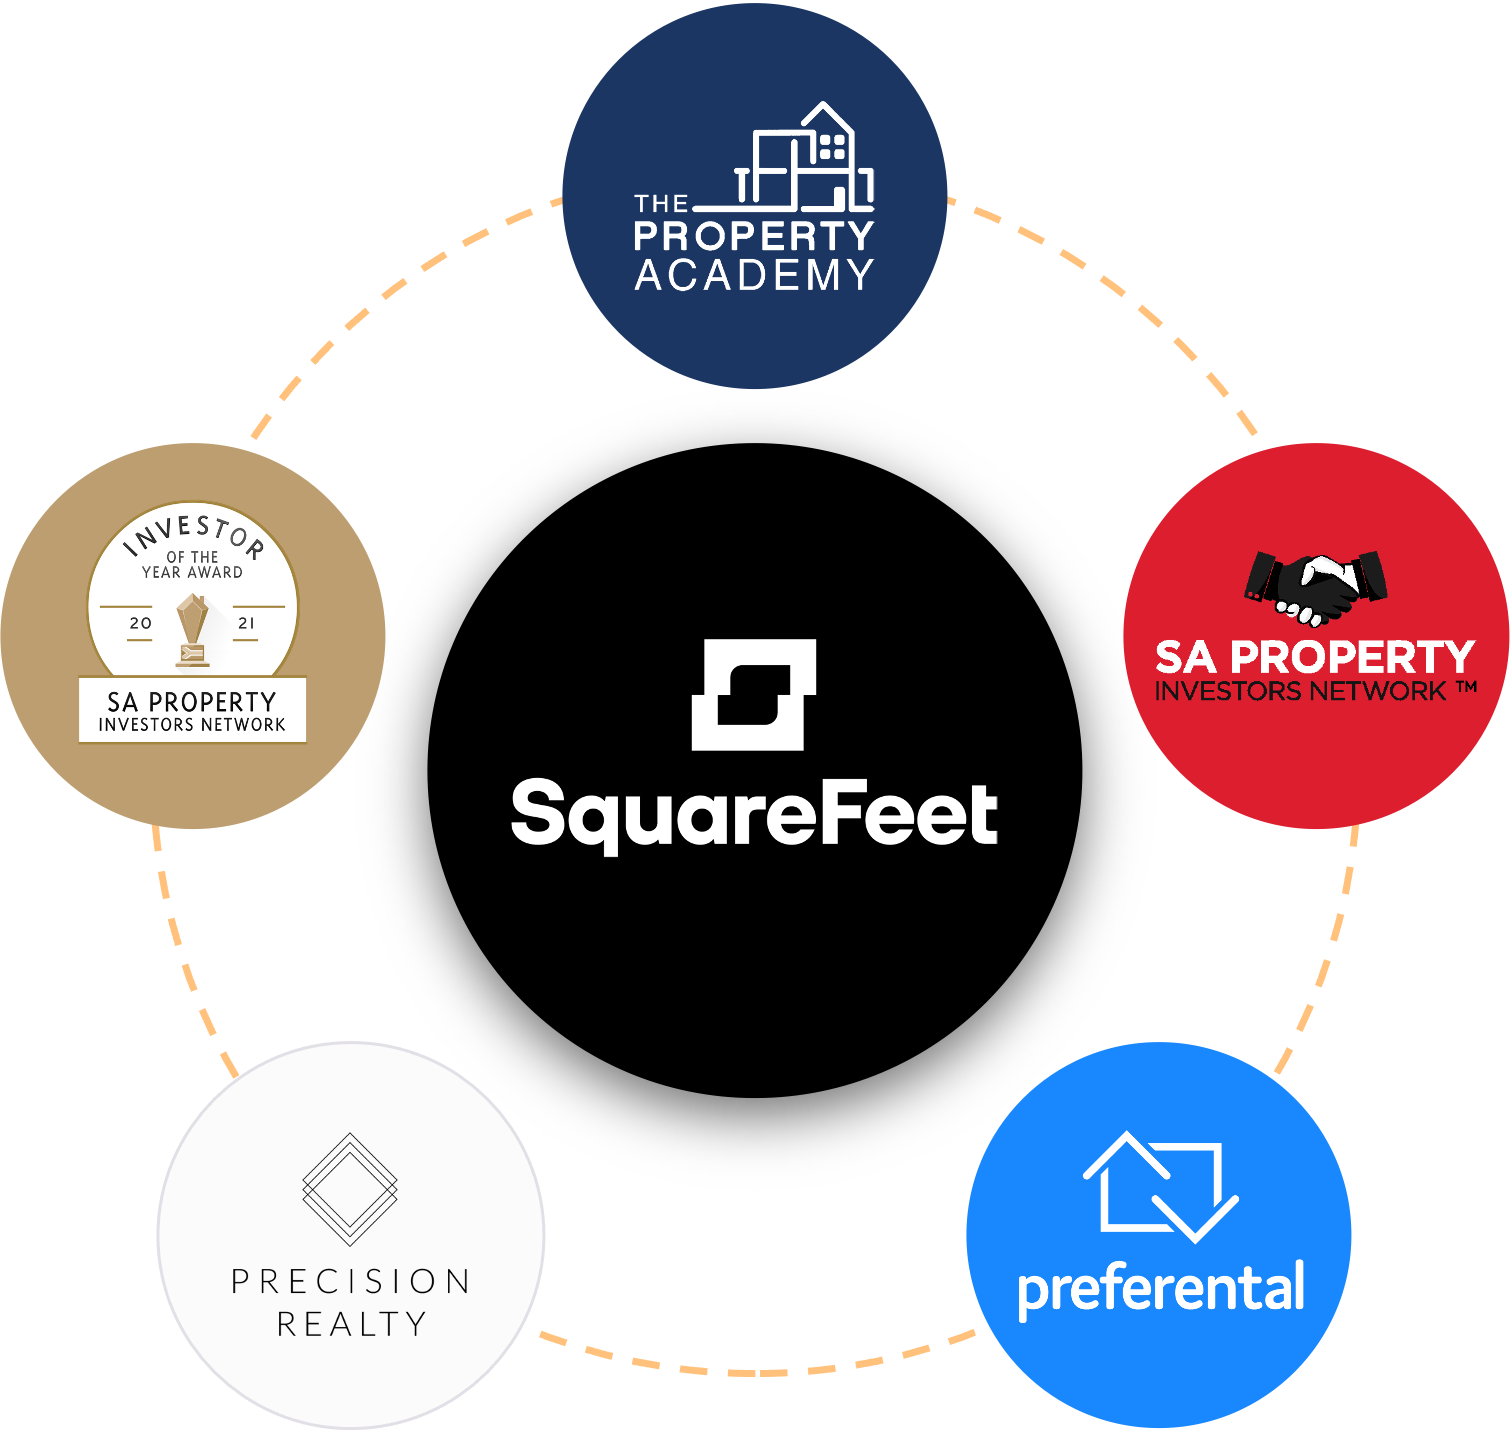 Squarefeet proptech ecosystem